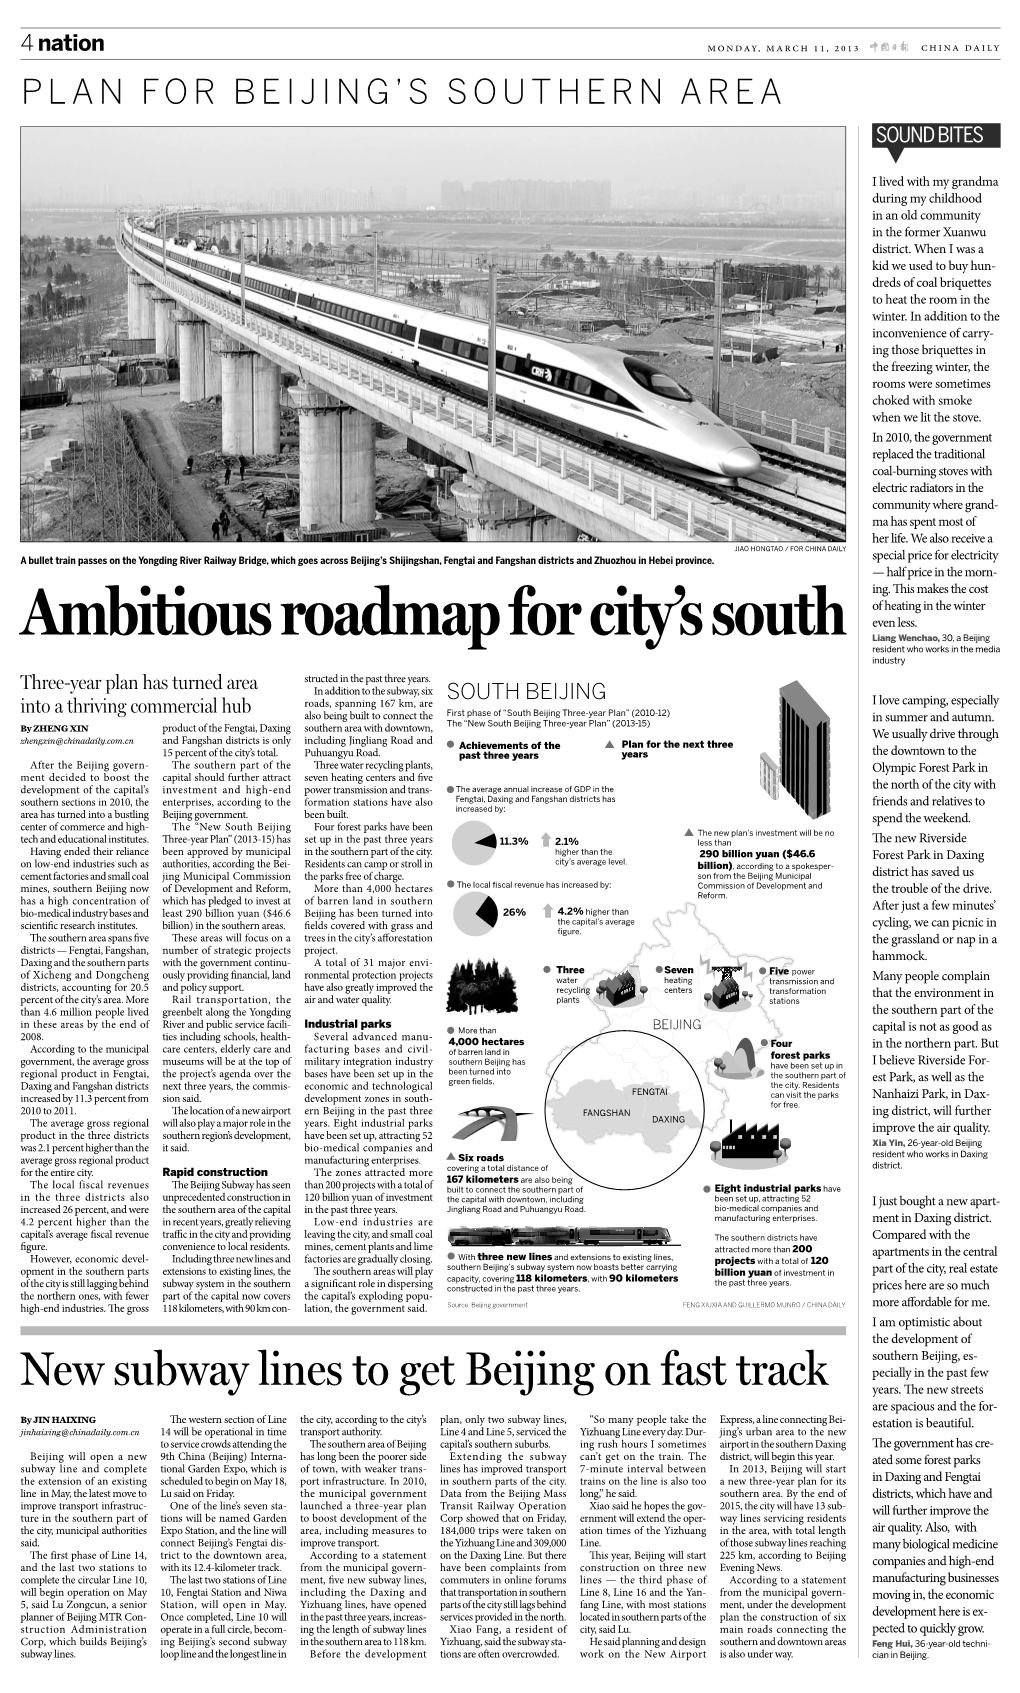 Ambitious Roadmap for City's South